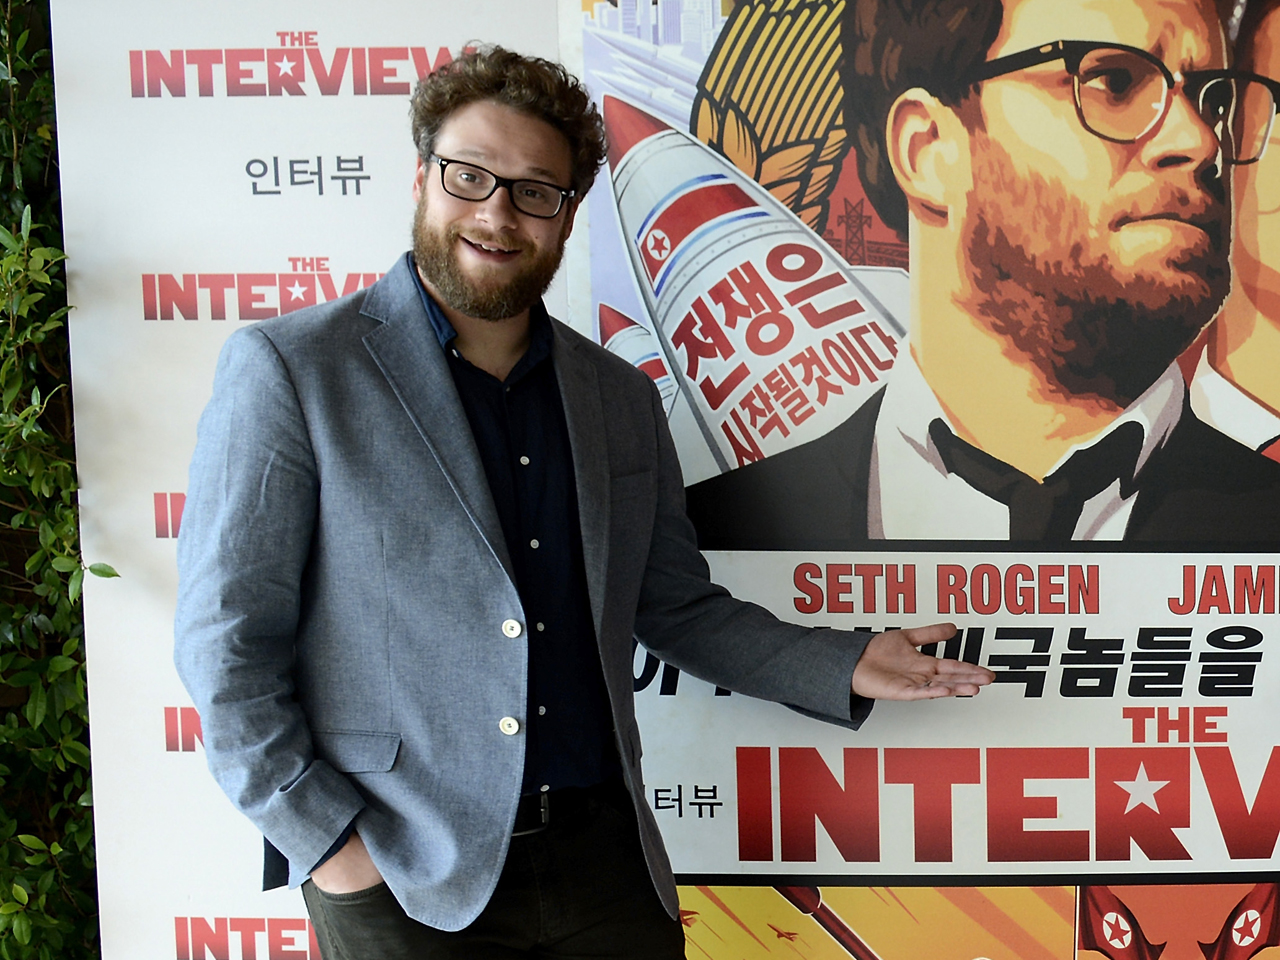 North Korea The Interview Seth Rogen And James Francos Movie An